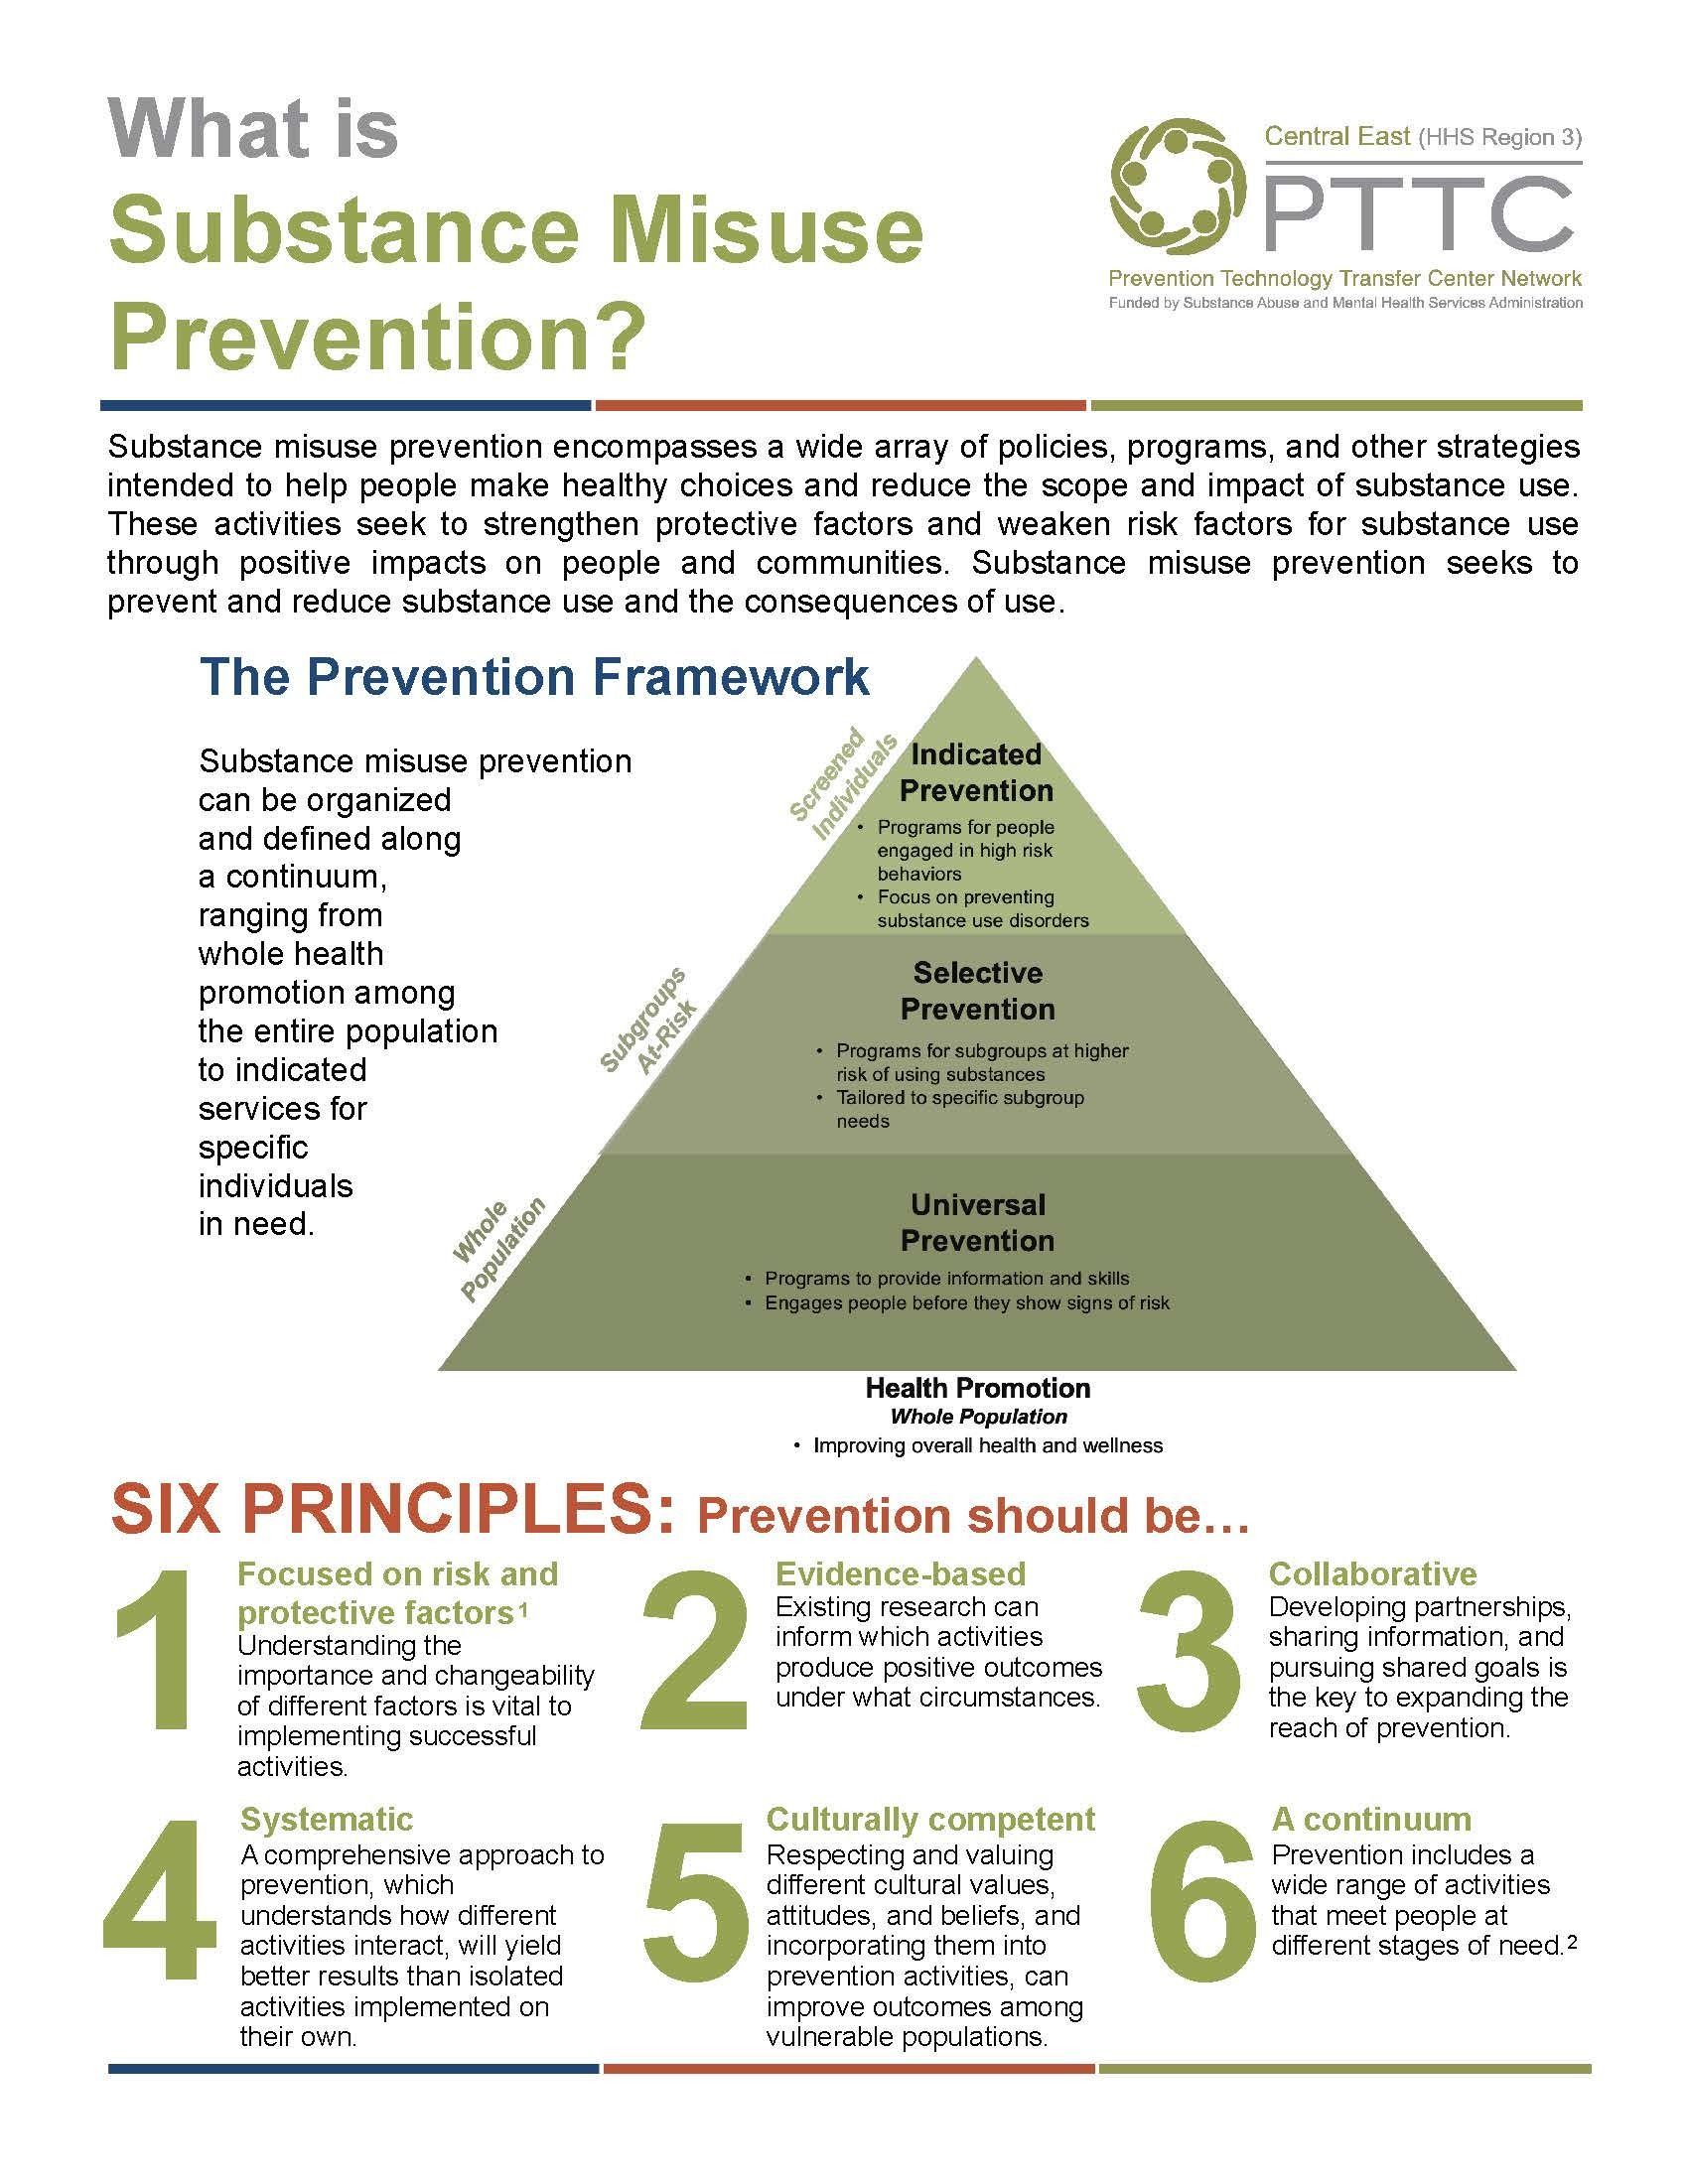 What is Substance Misuse Prevention?